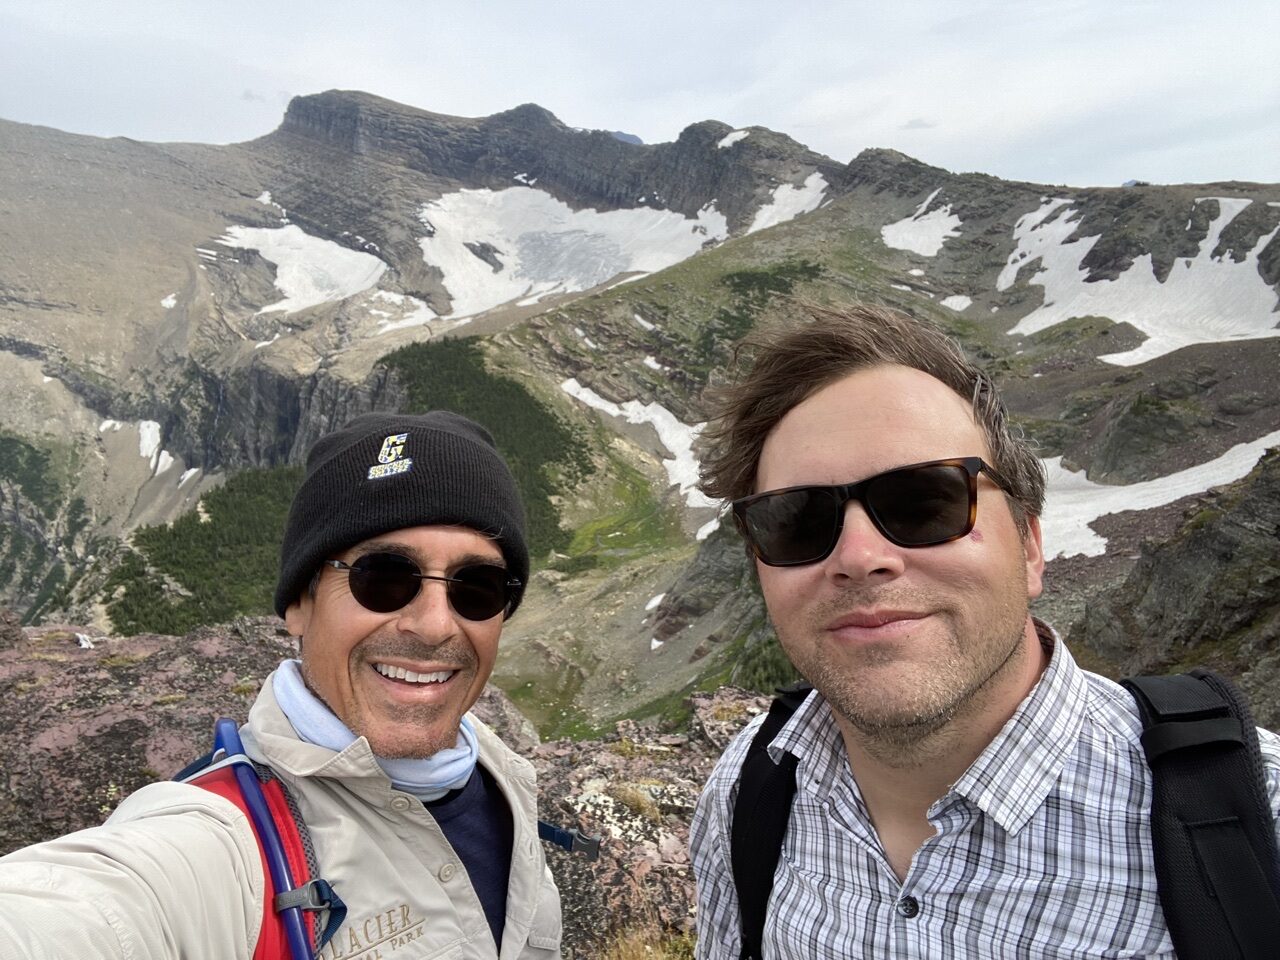 Jeff noel and Jody Maberry in mountains